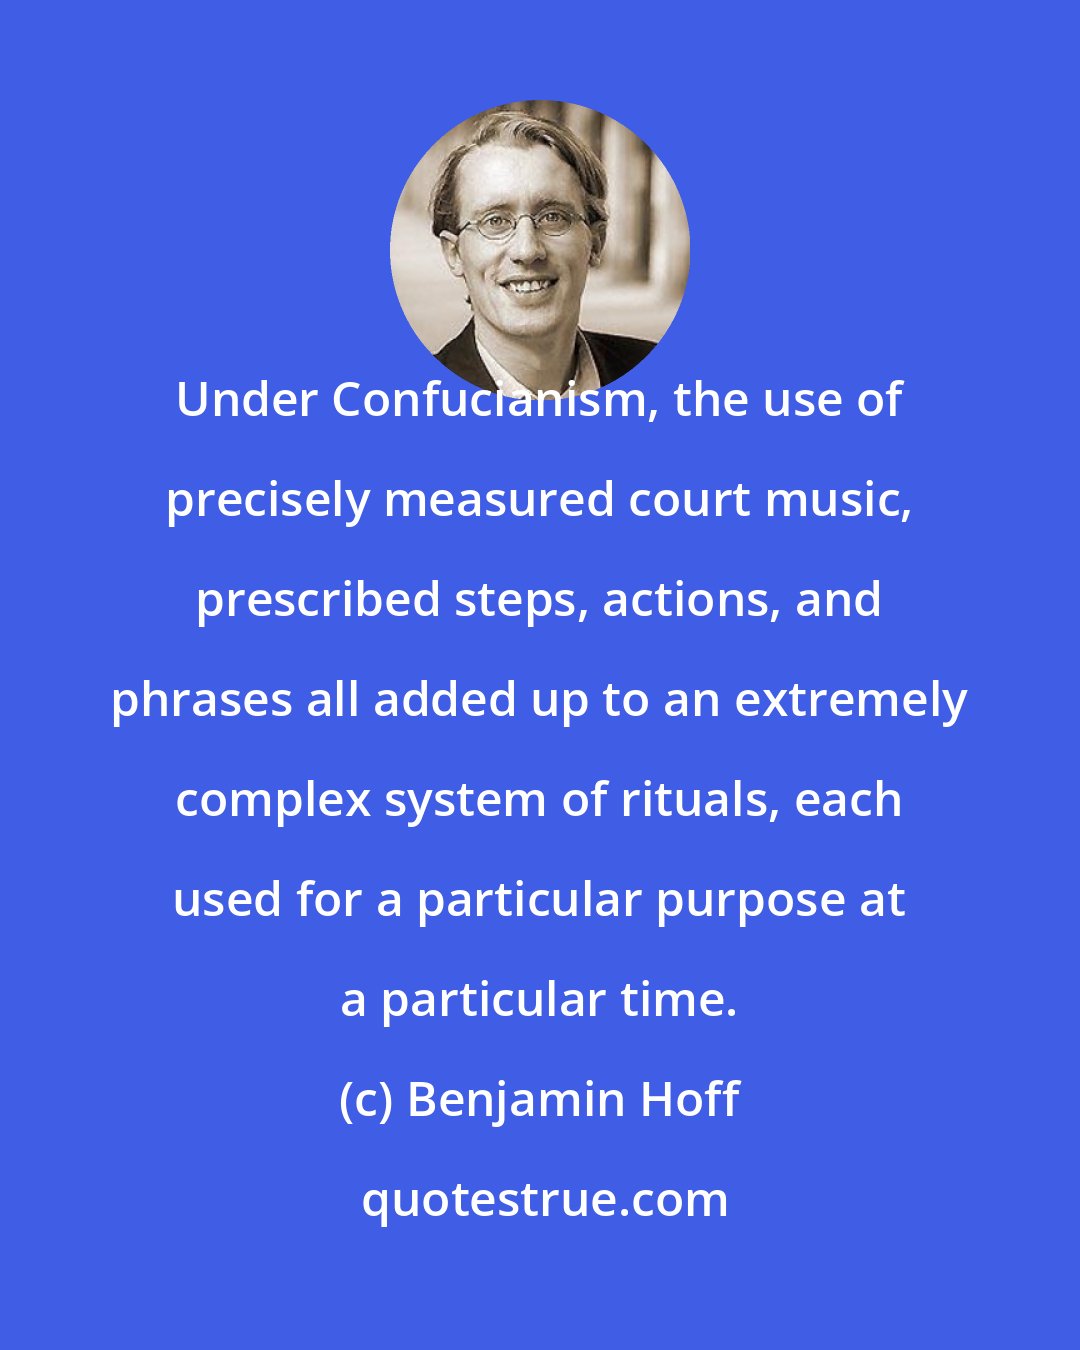 Benjamin Hoff: Under Confucianism, the use of precisely measured court music, prescribed steps, actions, and phrases all added up to an extremely complex system of rituals, each used for a particular purpose at a particular time.